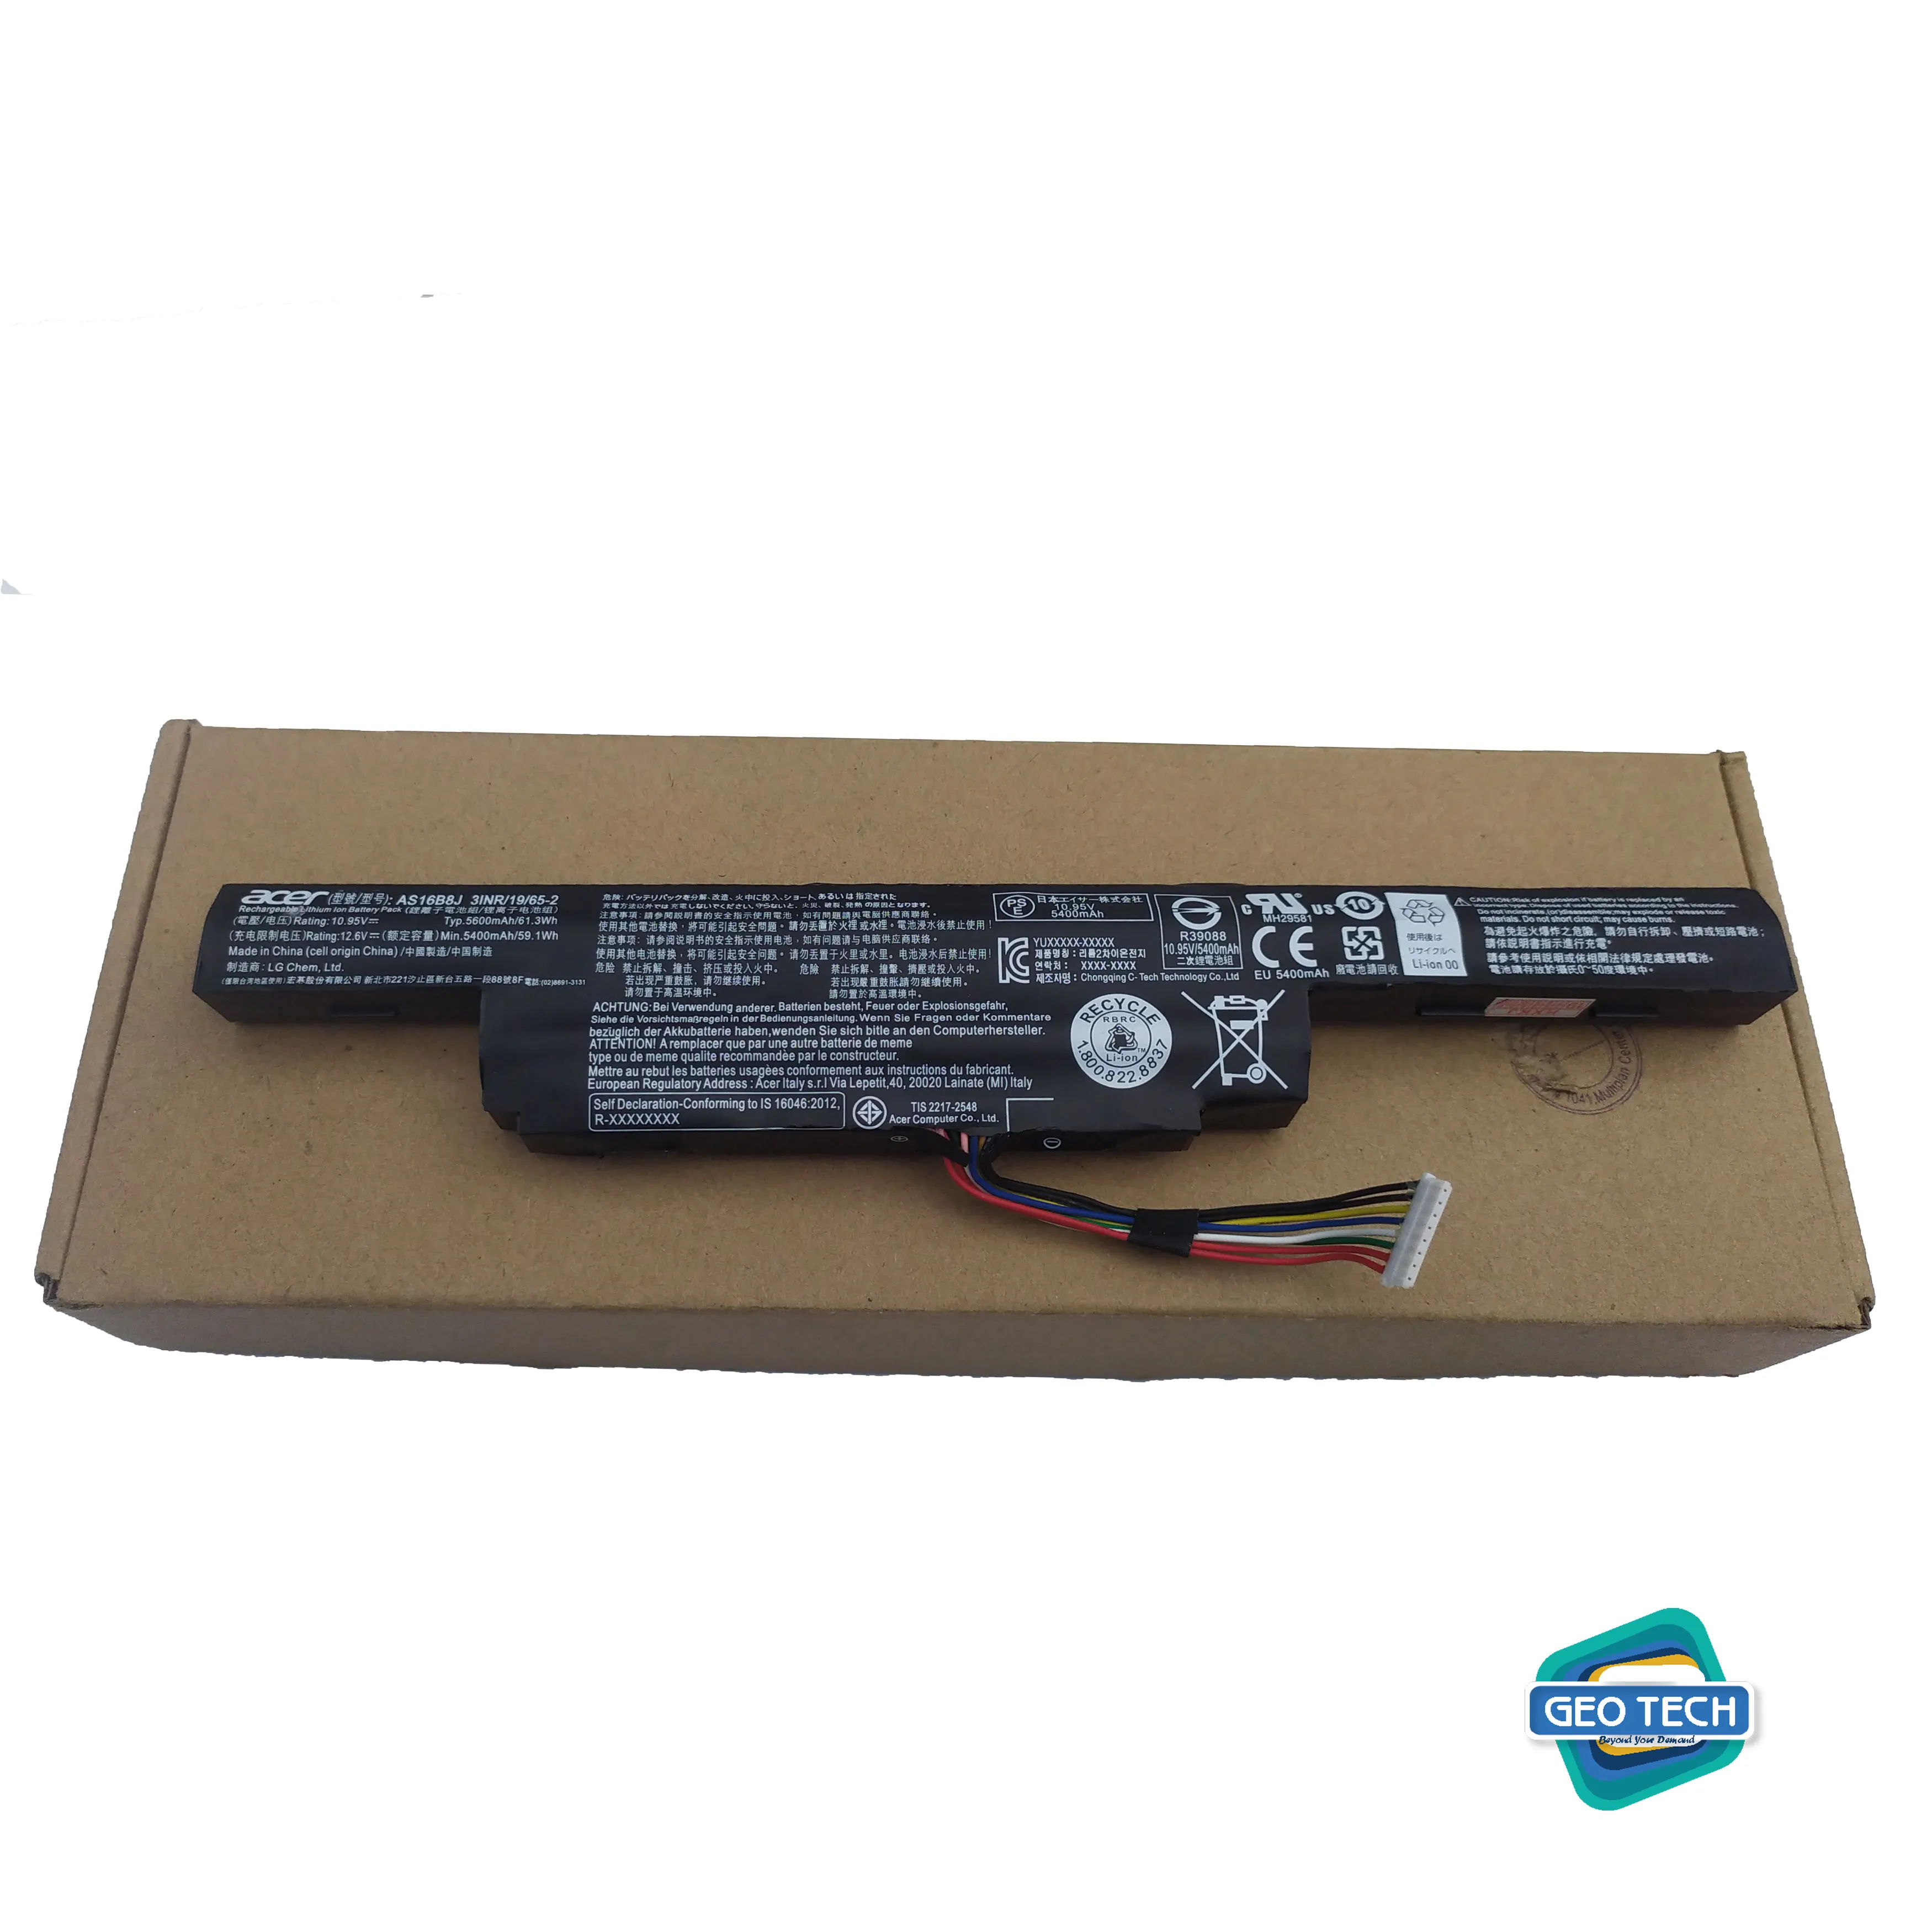 AS16B5J Replacement Laptop Battery Compatible with Acer Aspire E5-575G E5-575G-53VG 15.6" Series Fit 3INR/19/65-2 AS16B5J AS16B8J 10.95V 61.3Wh/5600mAh oem